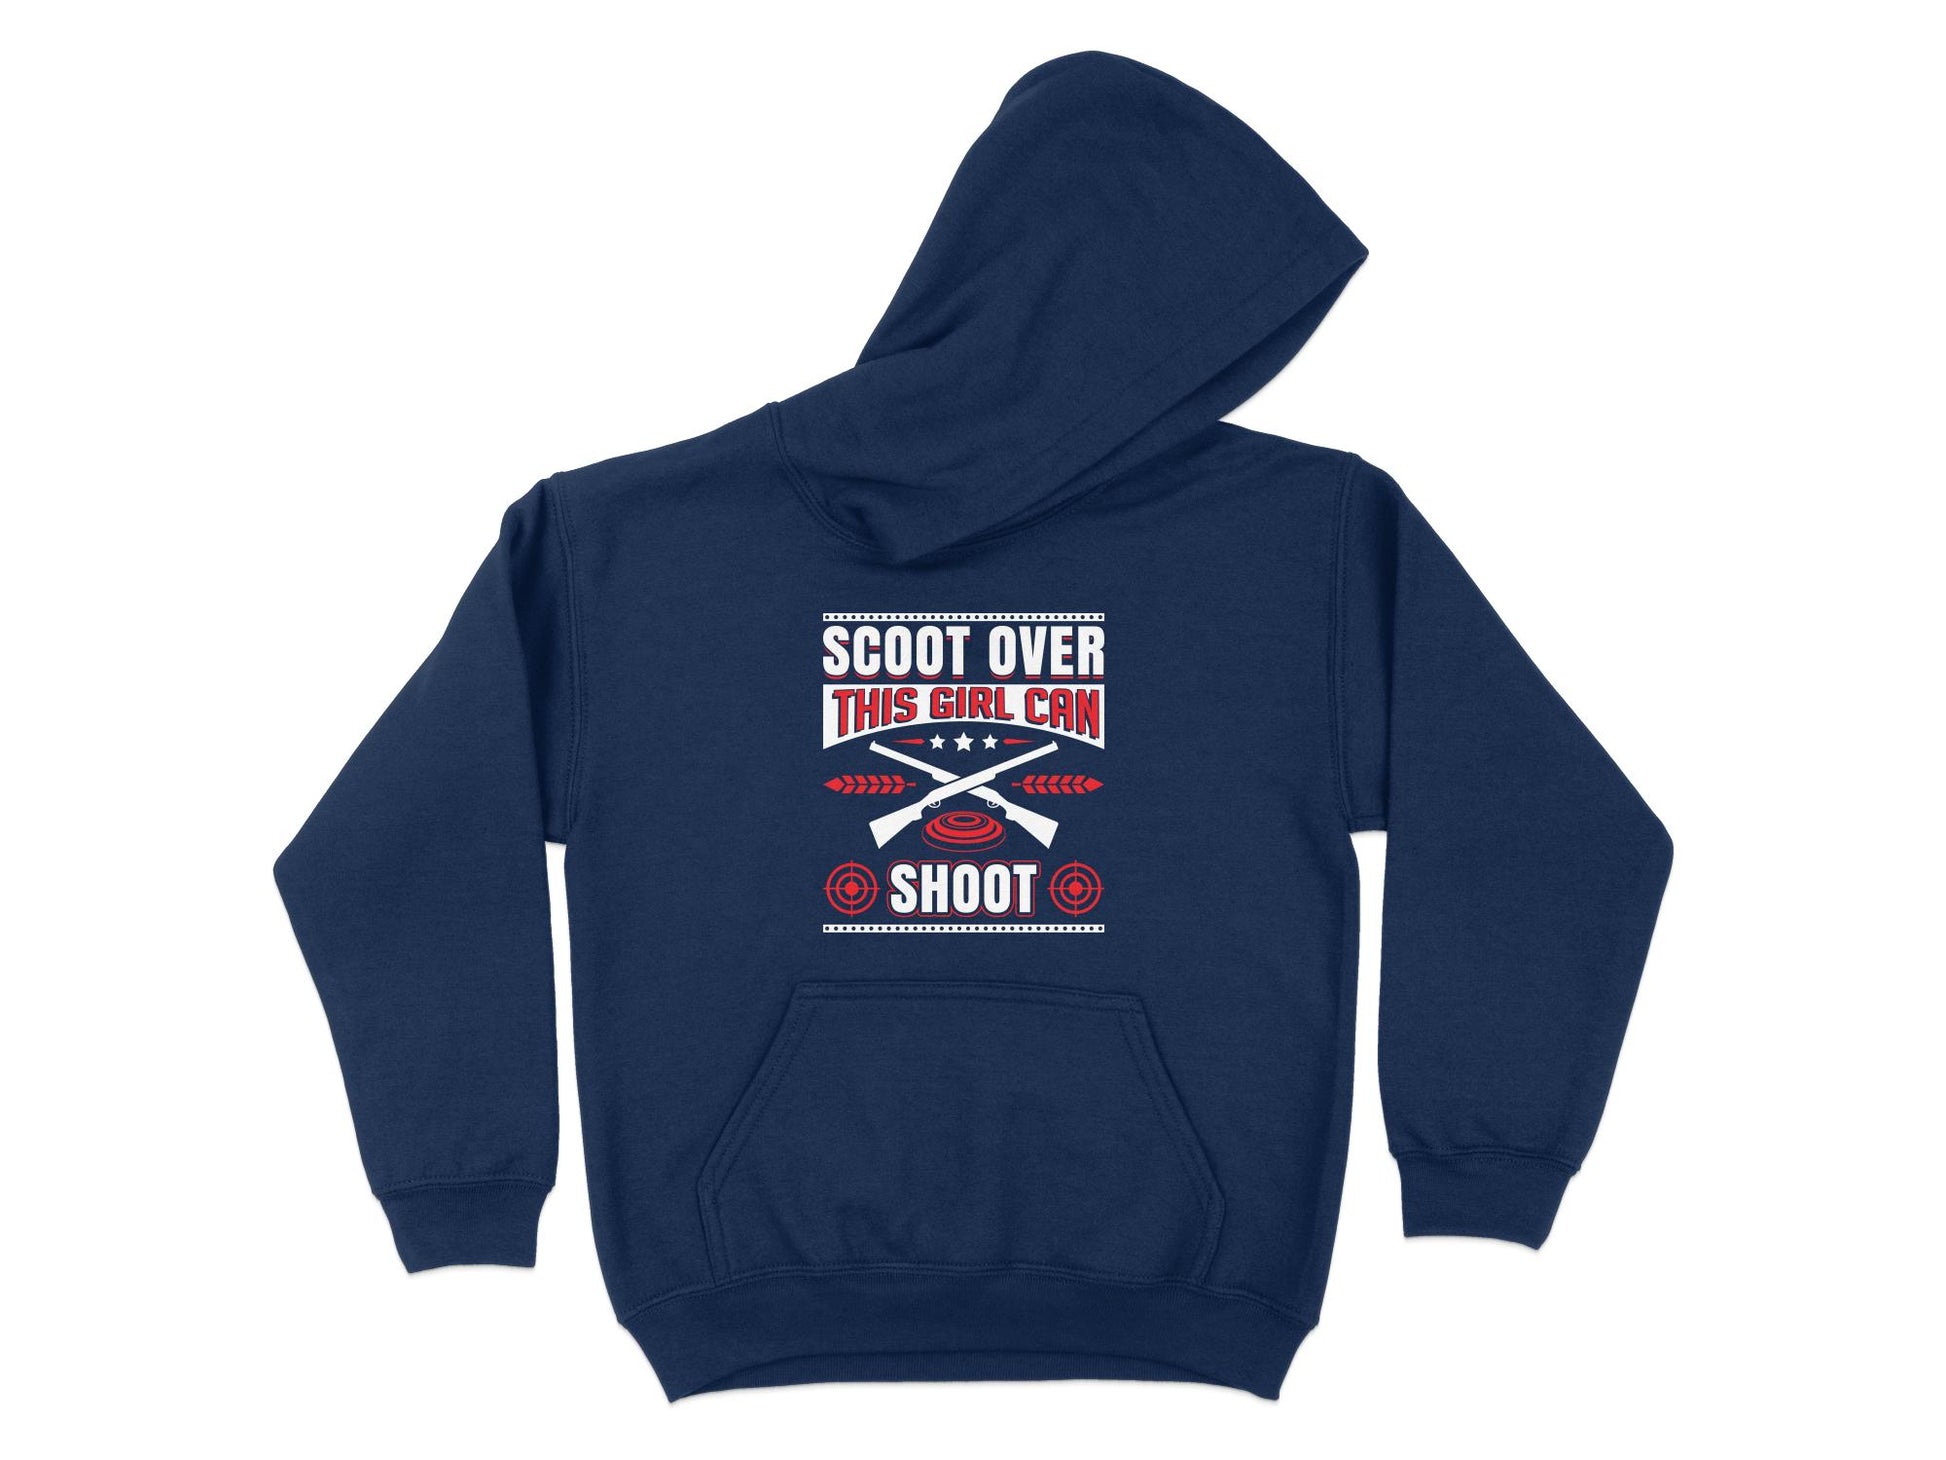 Trap Shooting Hoodie - Scoot Over This Girl Can Shoot, navy blue